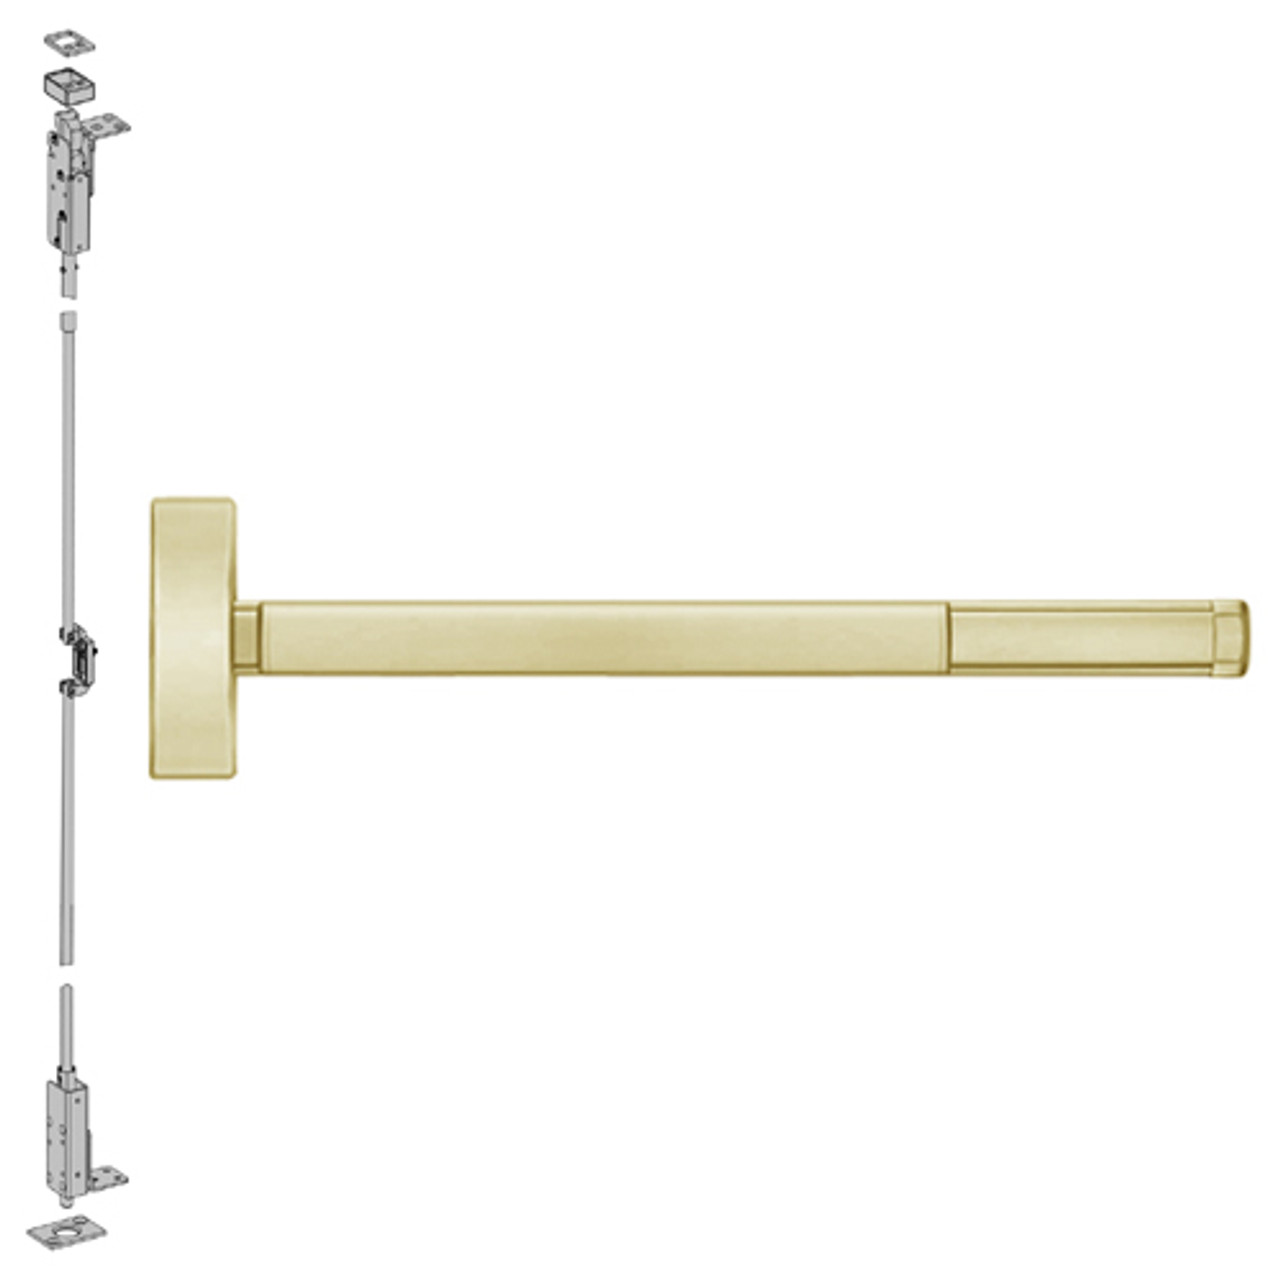 DE2708-606-36 PHI 2700 Series Non Fire Rated Wood Door Concealed Vertical Exit Device Prepped for Key Controls Lever-Knob in Satin Brass Finish